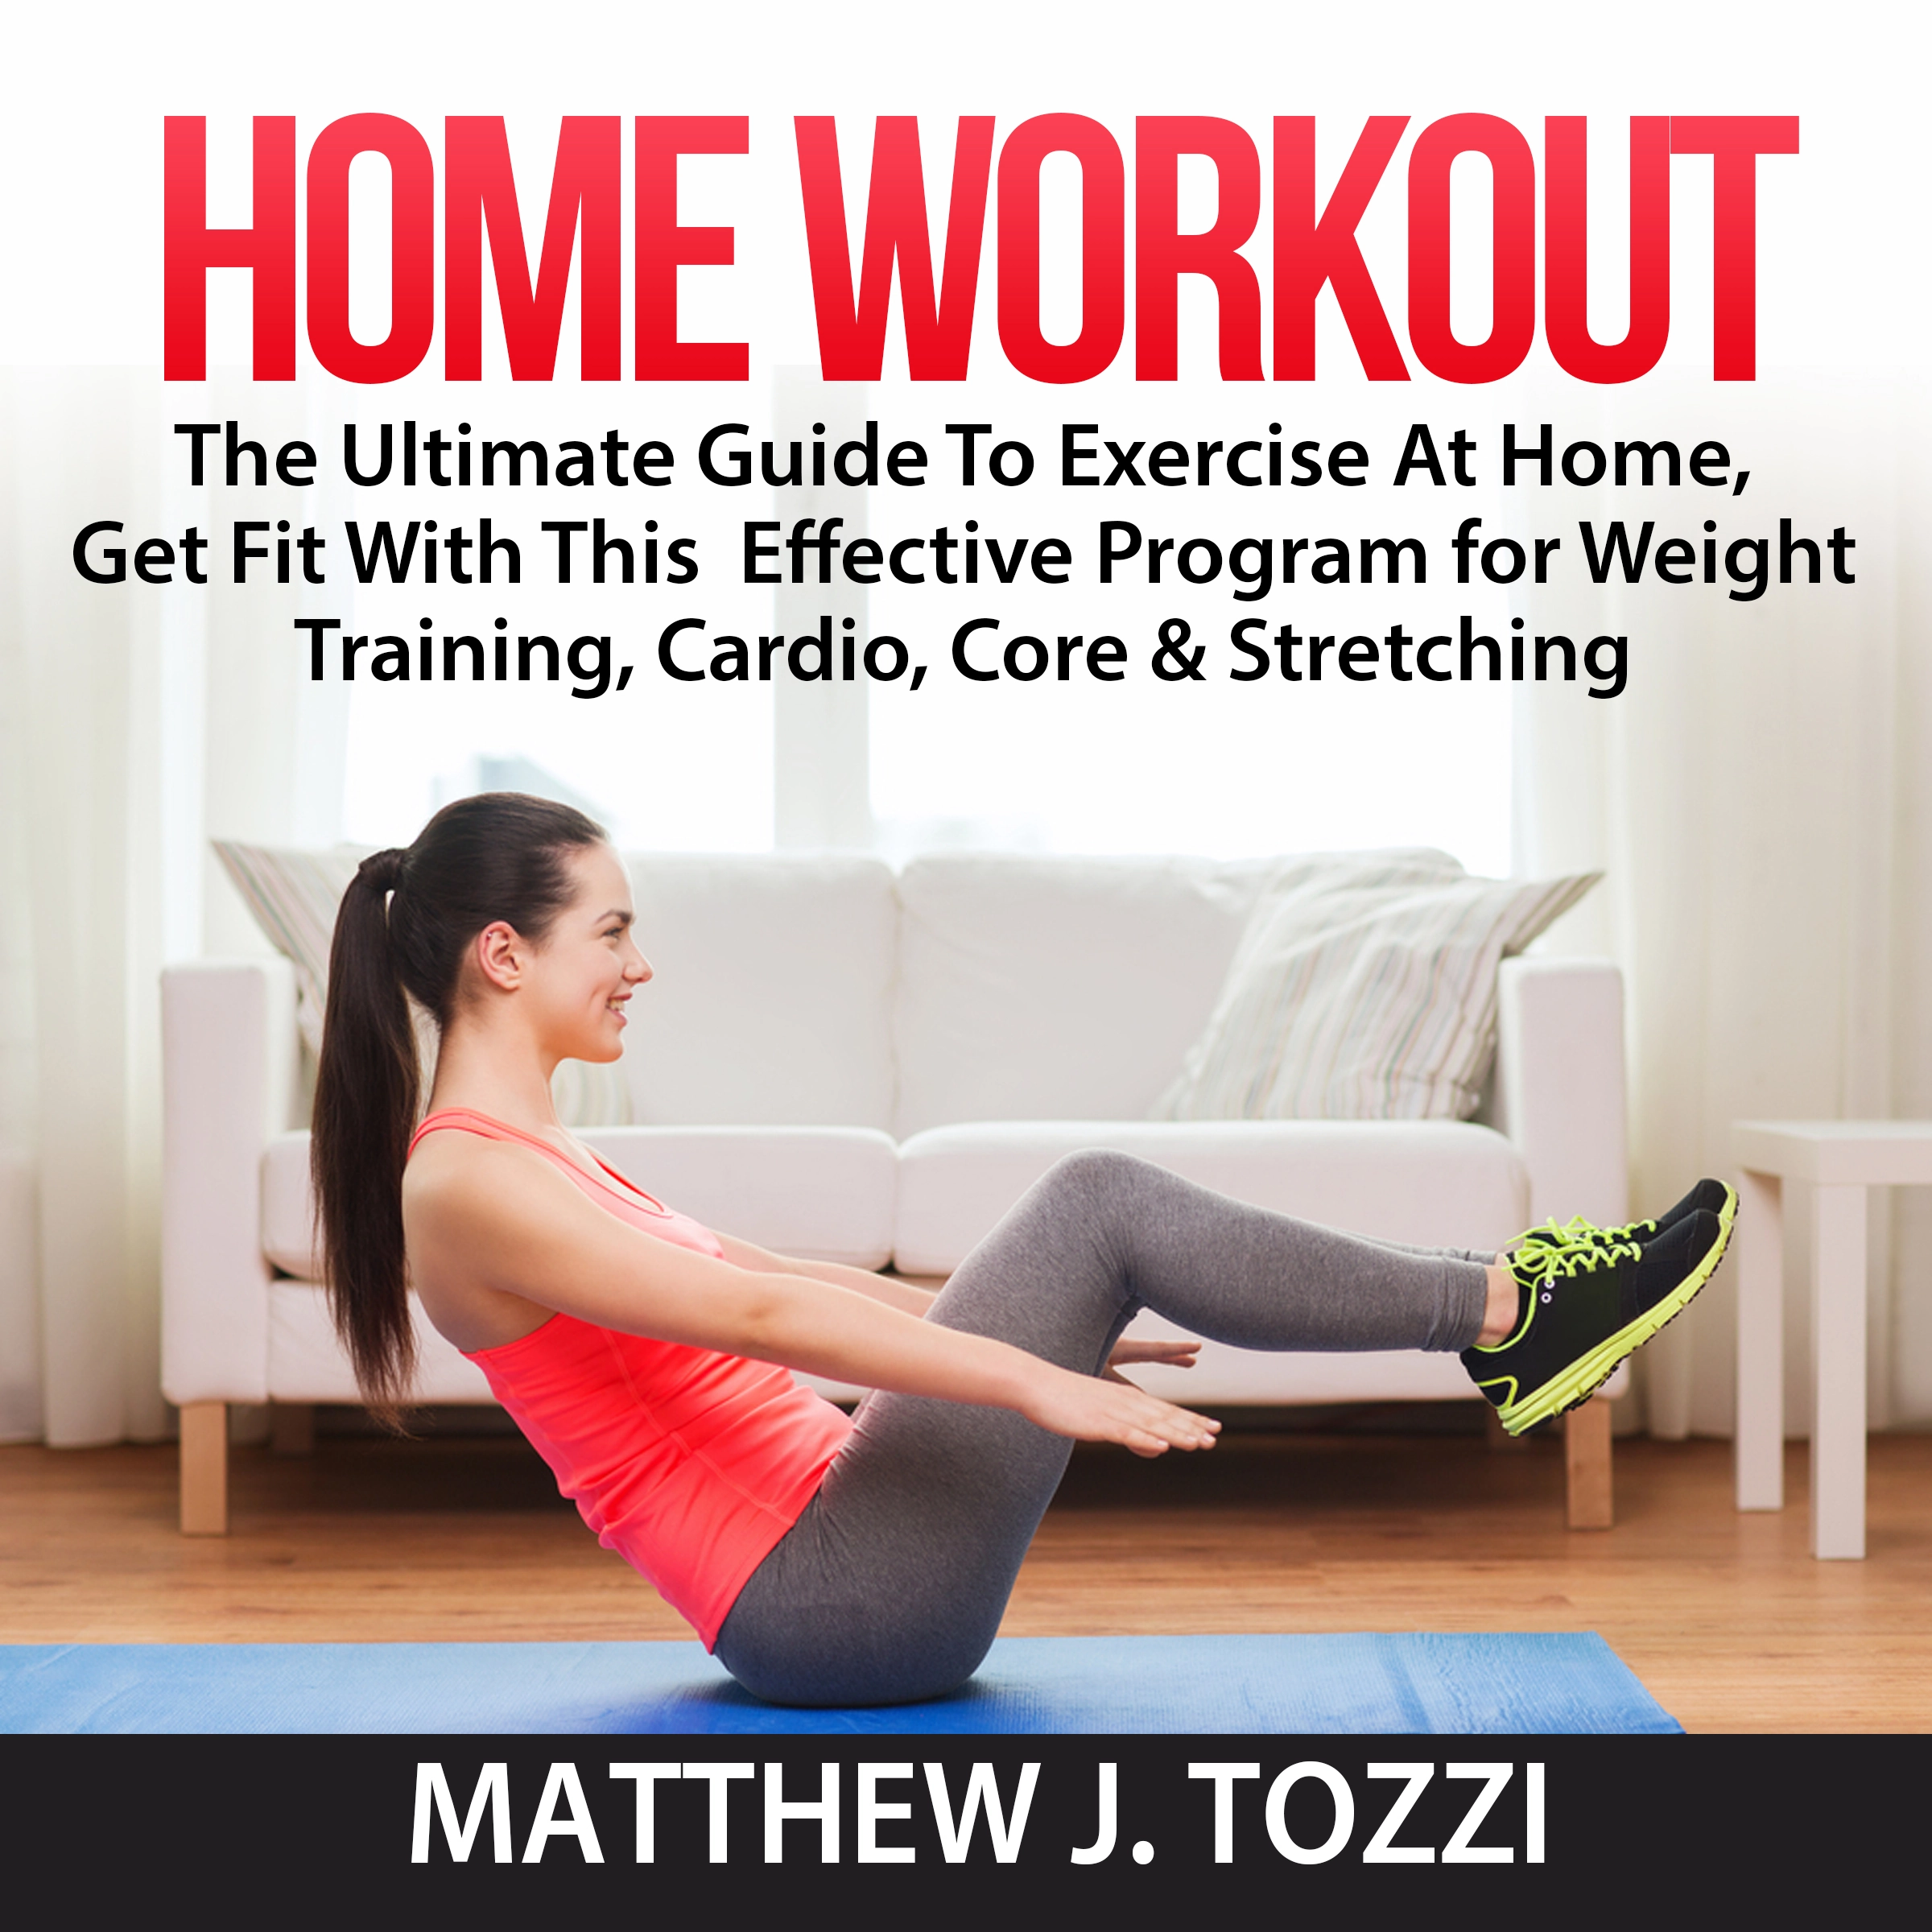 Home Workout: The Ultimate Guide To Exercise At Home, Get Fit With This  Effective Program for Weight Training, Cardio, Core & Stretching Audiobook by Matthew J. Tozzi